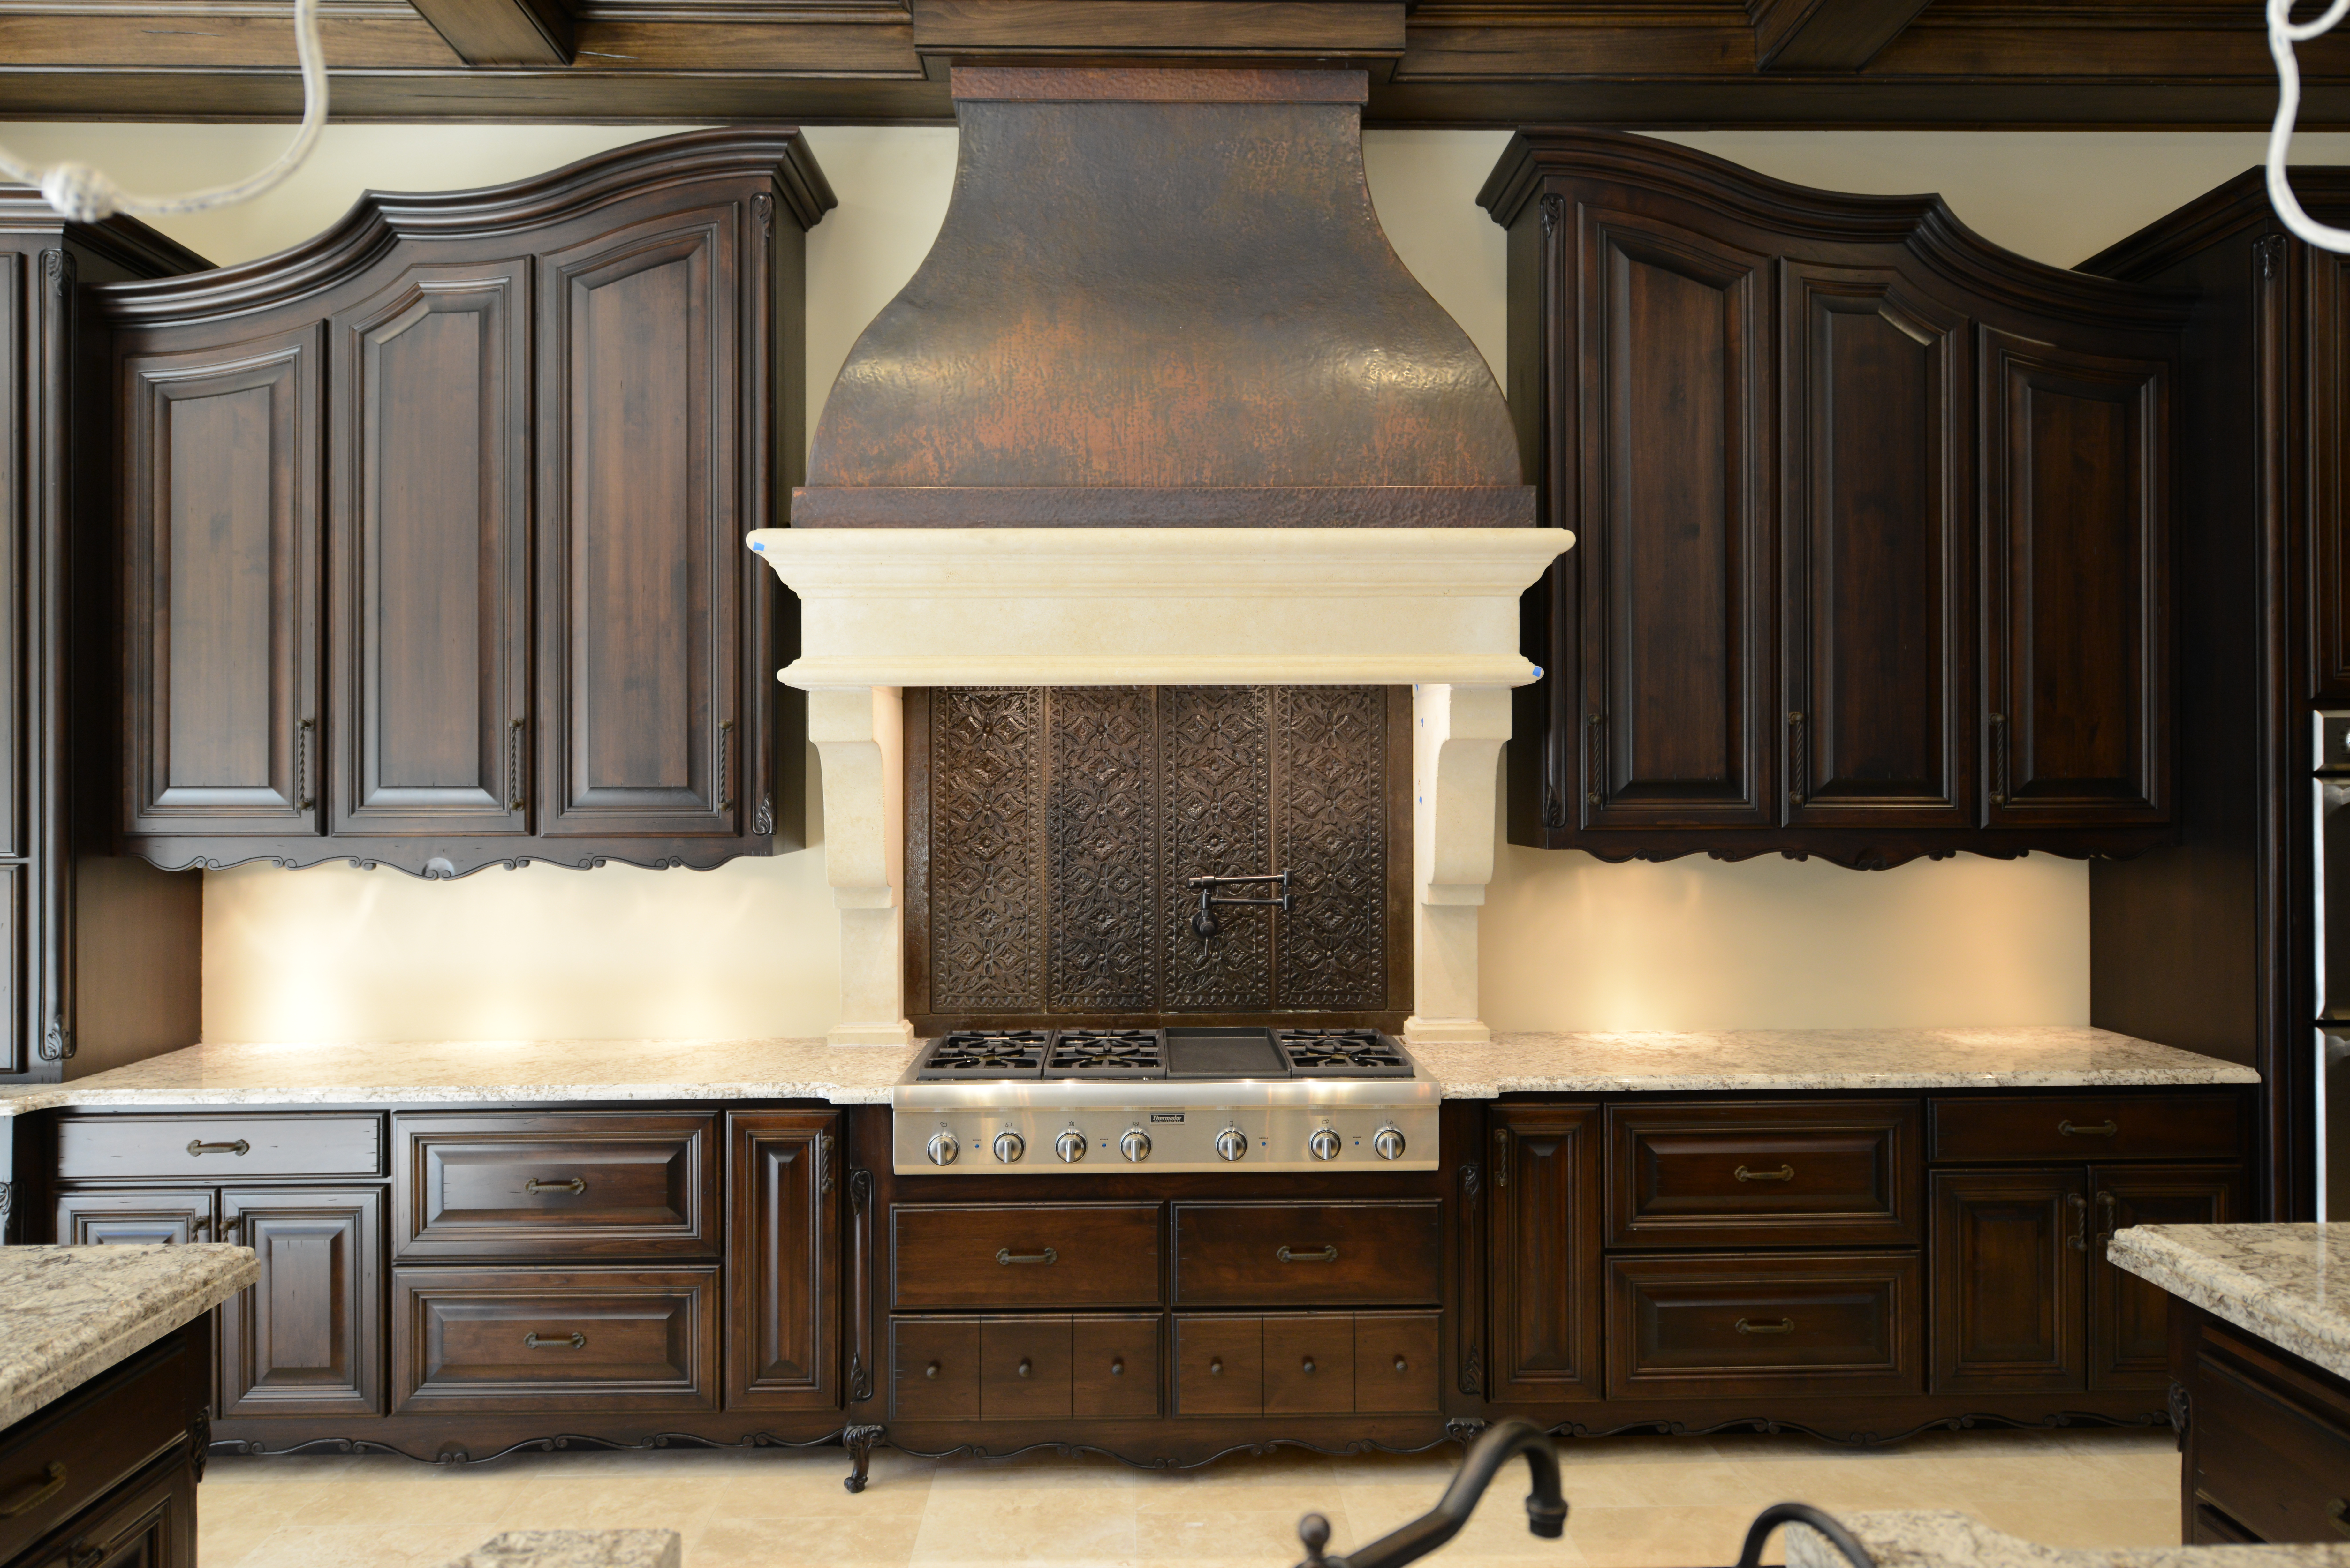 Zionsville Custom Cabinets Hand Crafted Cabinets Kitchens